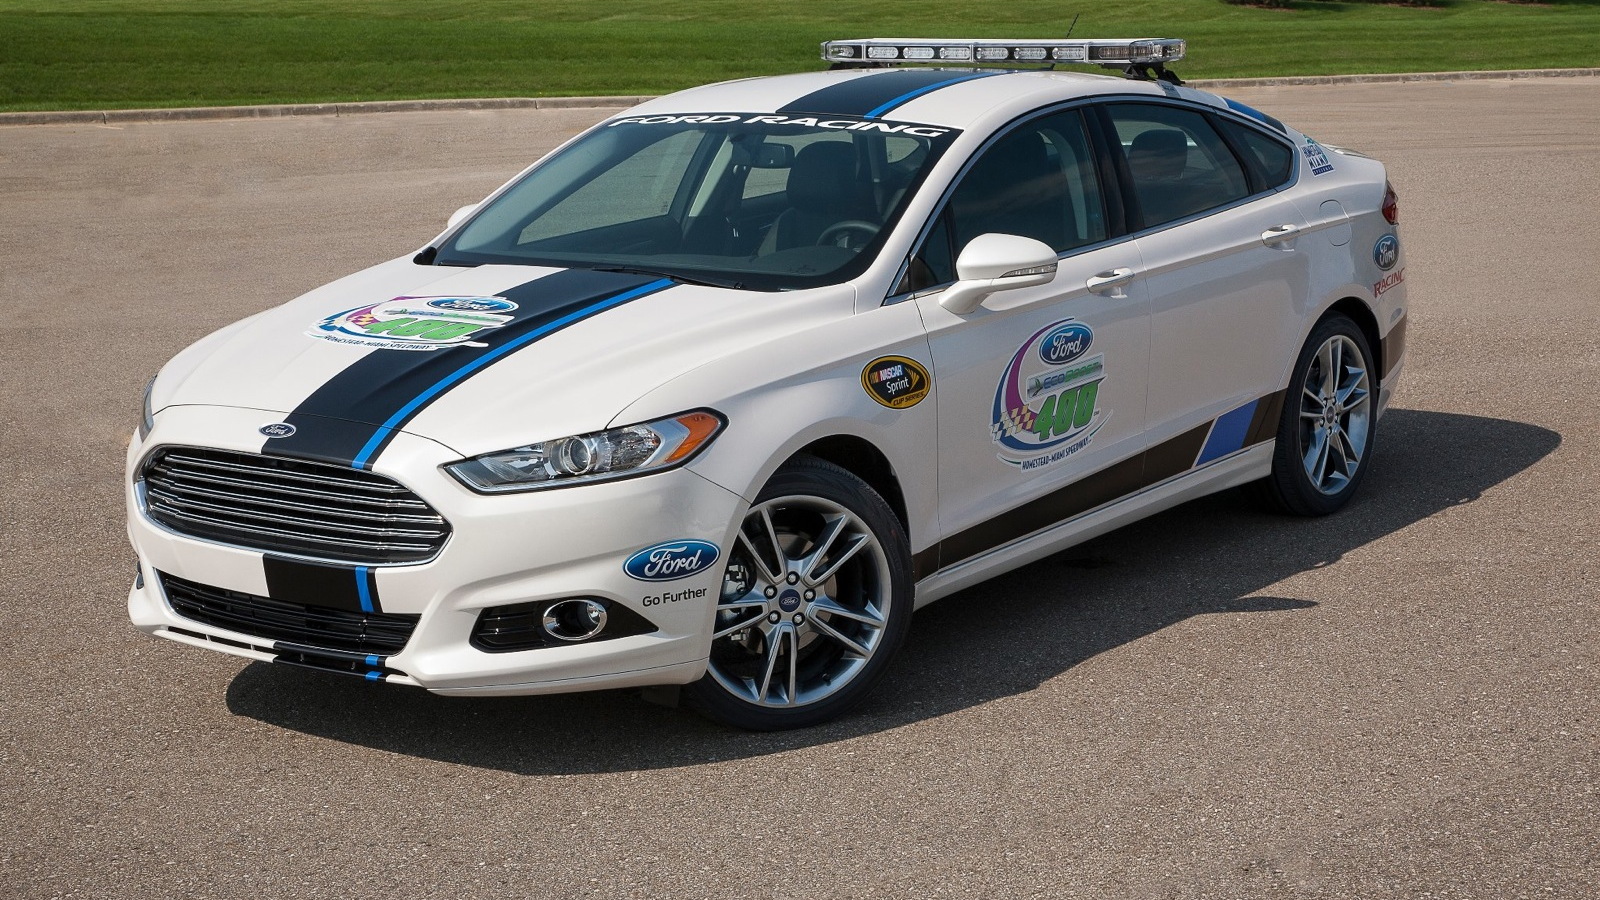 Ford Showing Off Four Tuned Fusion Sedans At SEMA